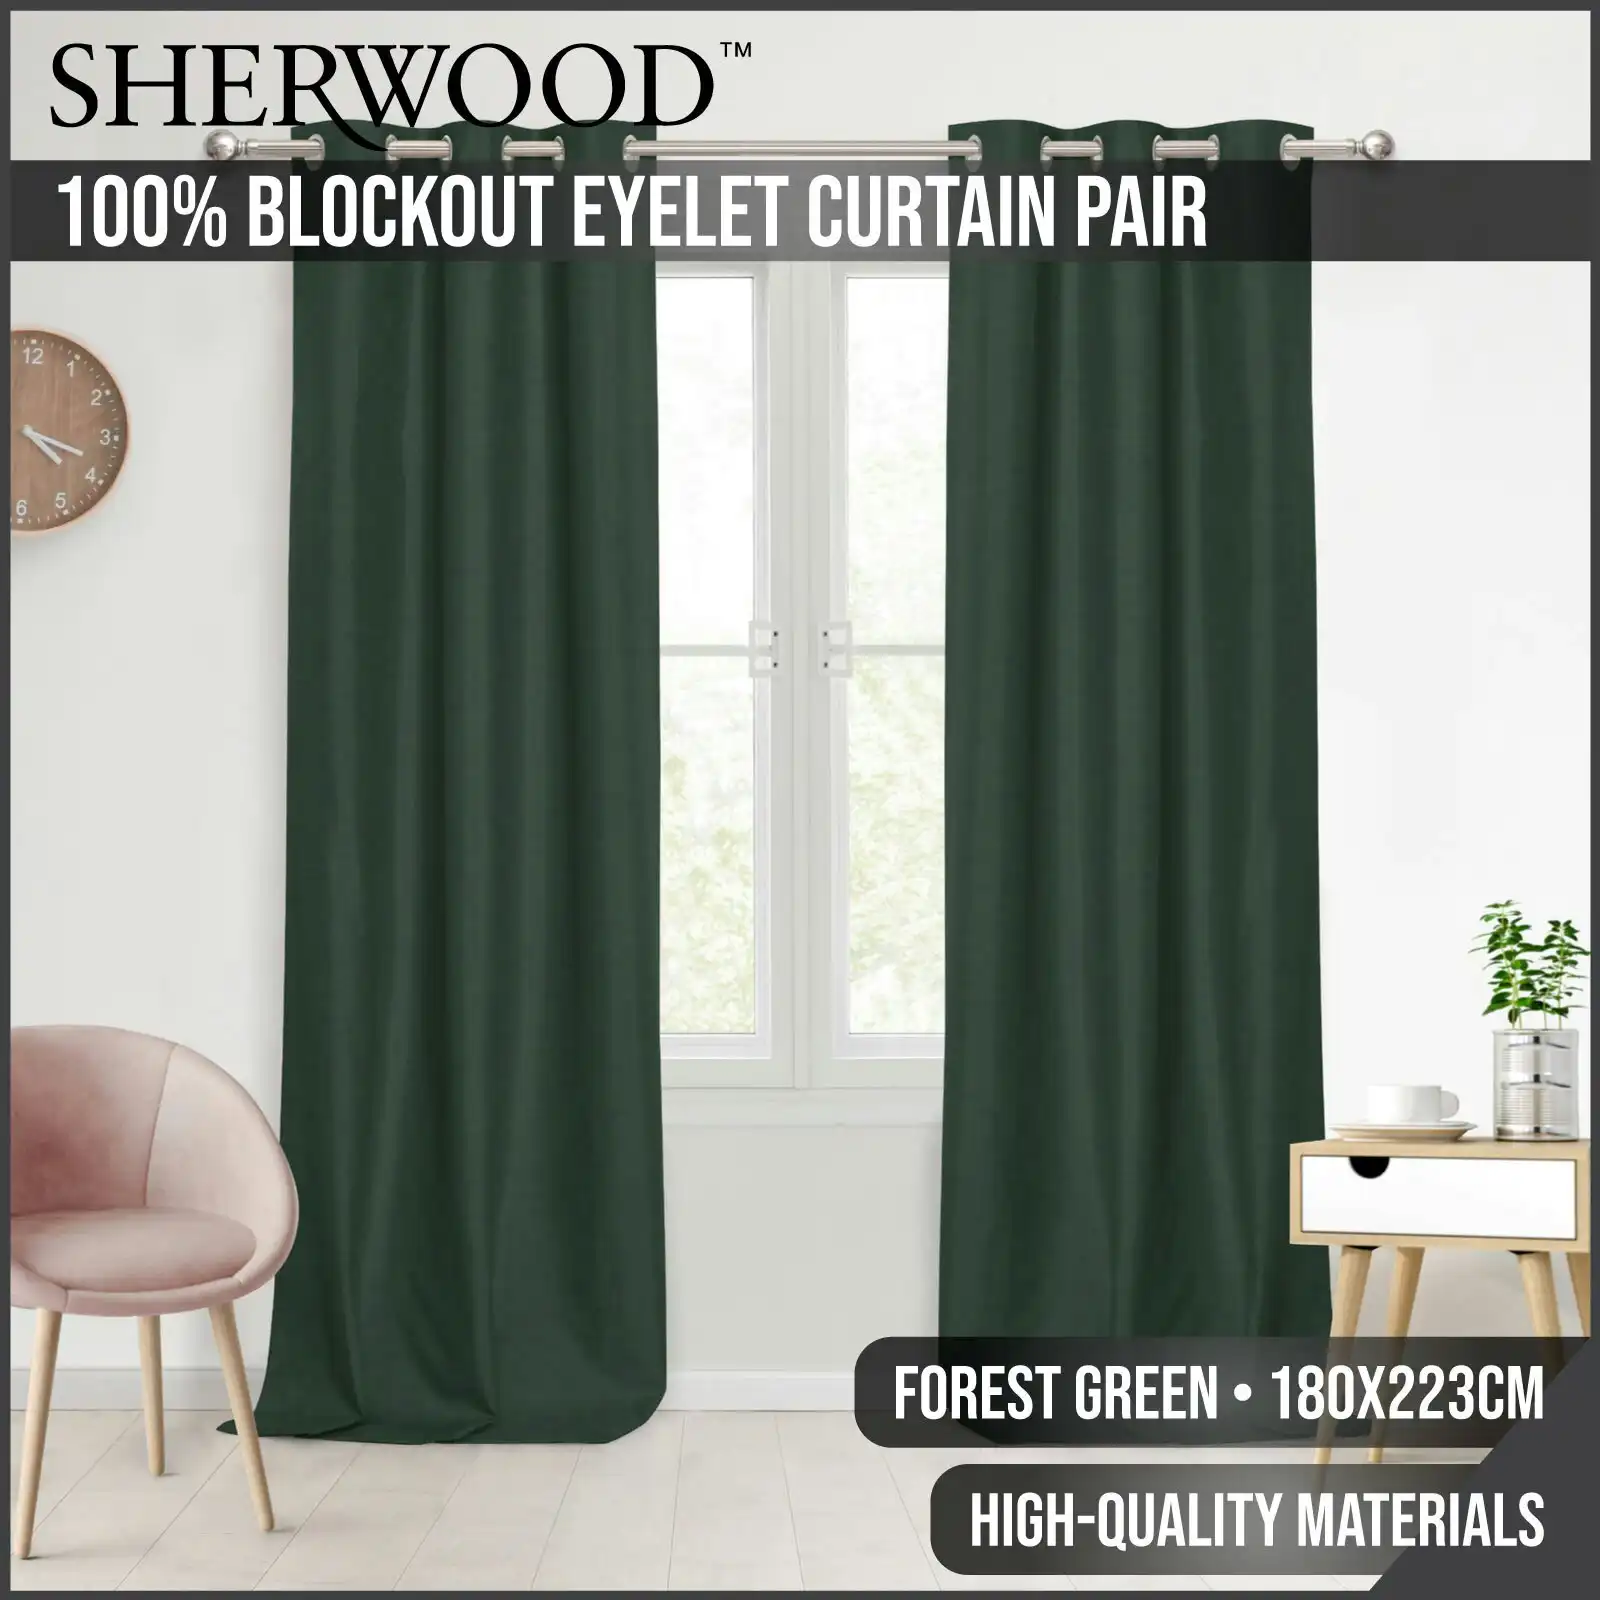 Sherwood Home 100% Blockout Eyelet Curtain Pair Forest Green 180x223cm